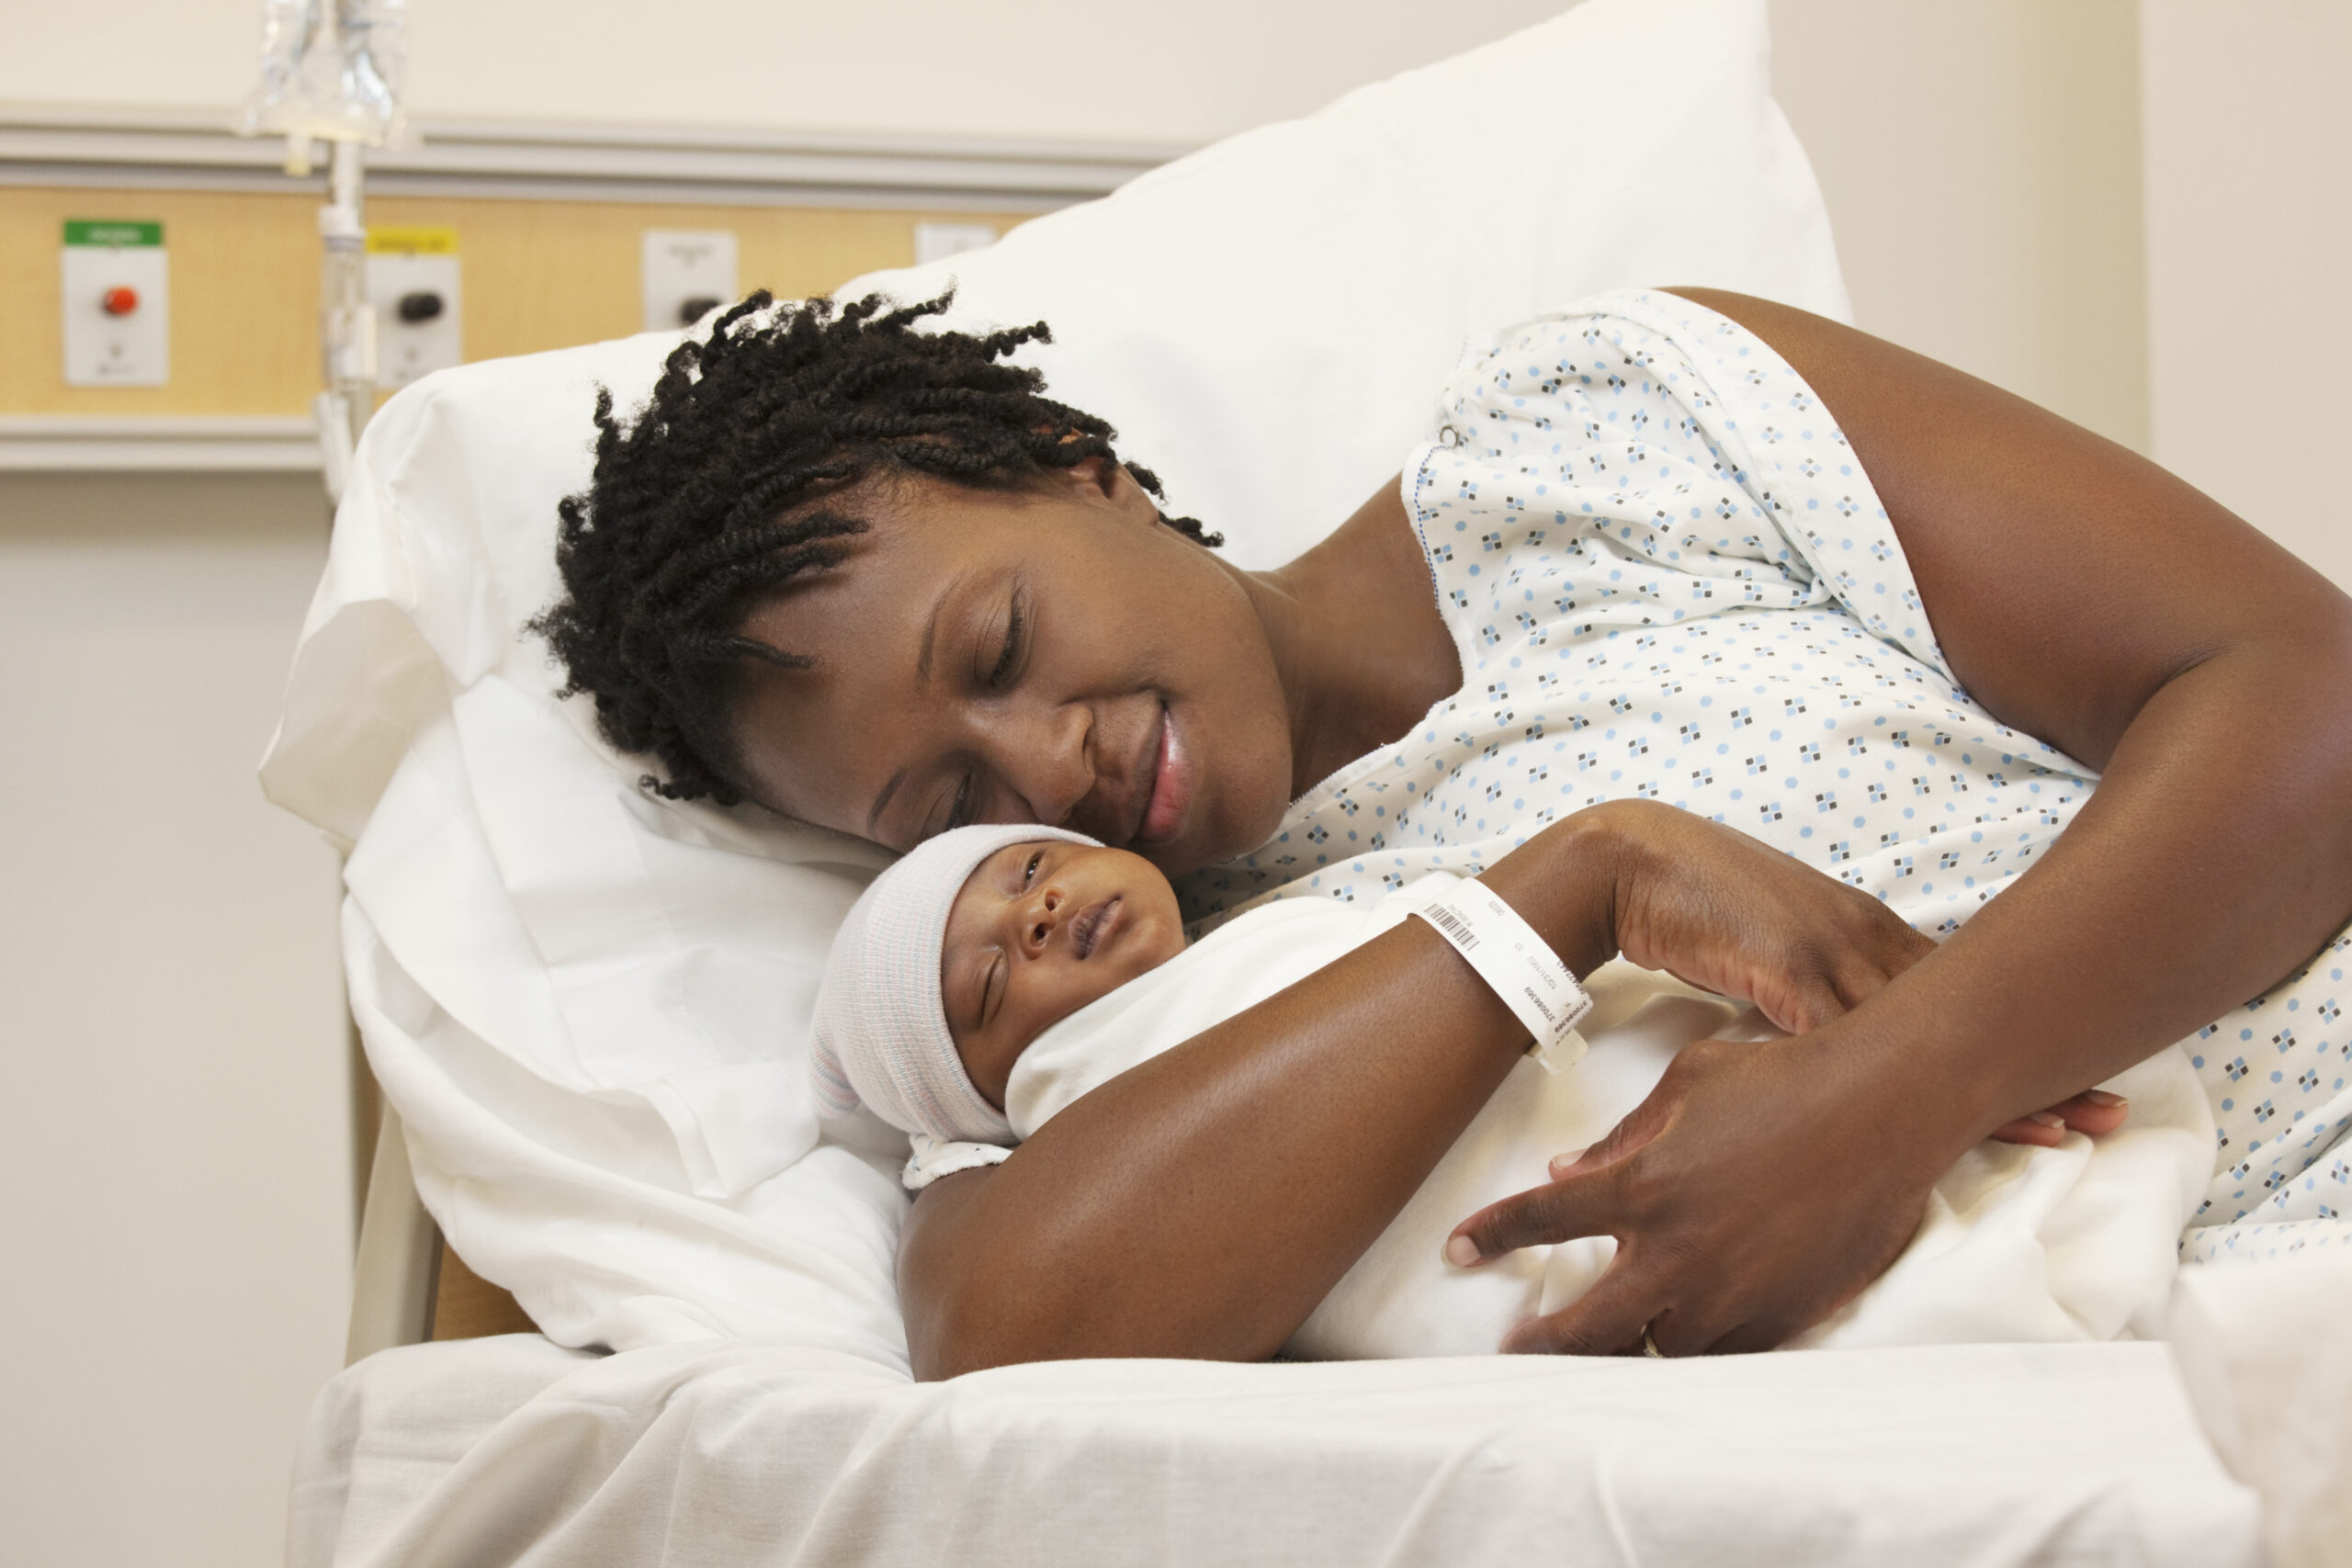 Maternal Health Care is Failing Black Women, Poll Finds